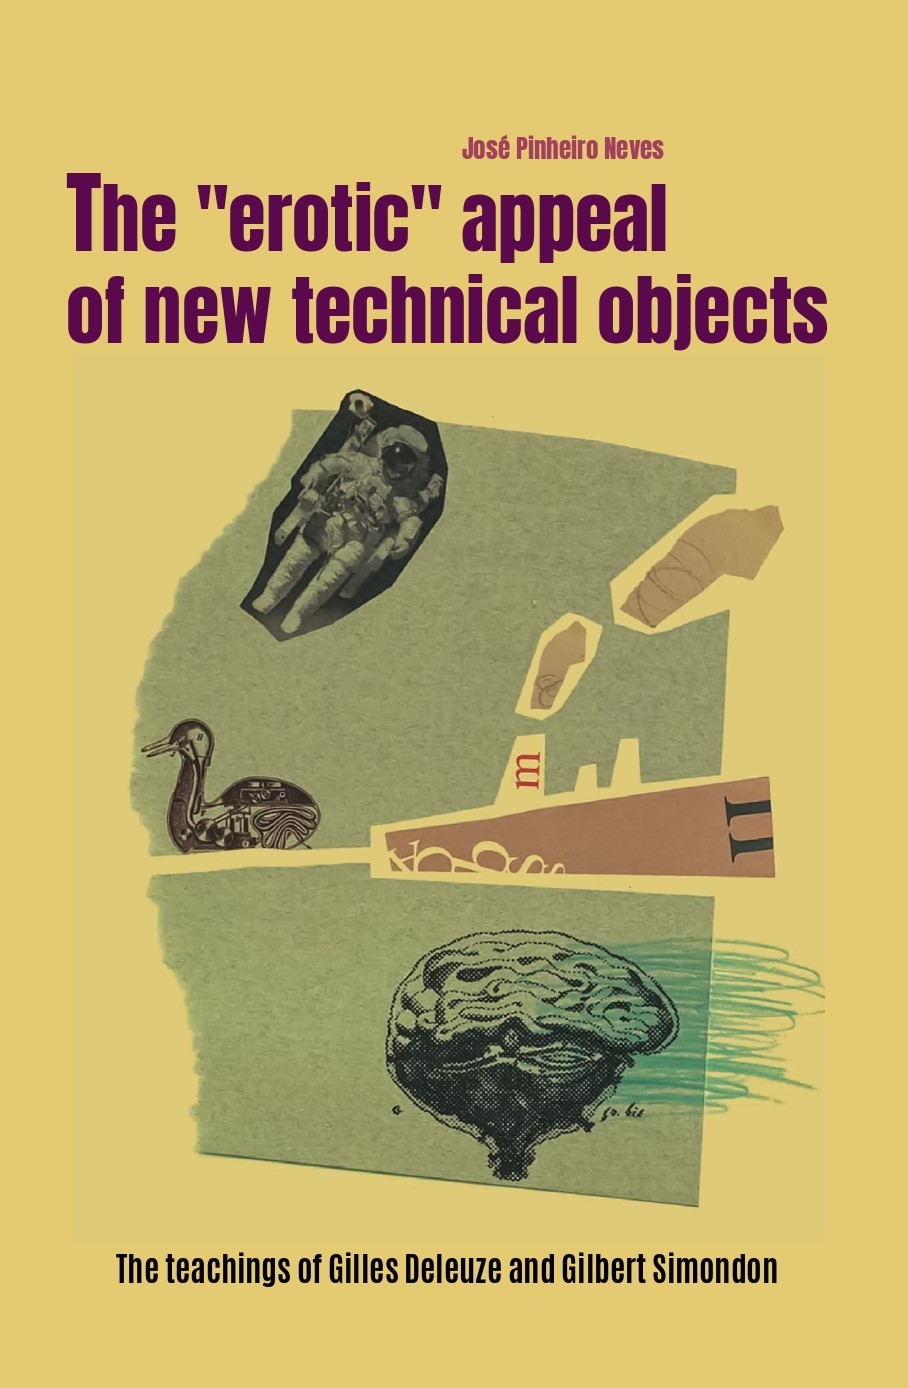 The erotic appeal of new technical objects